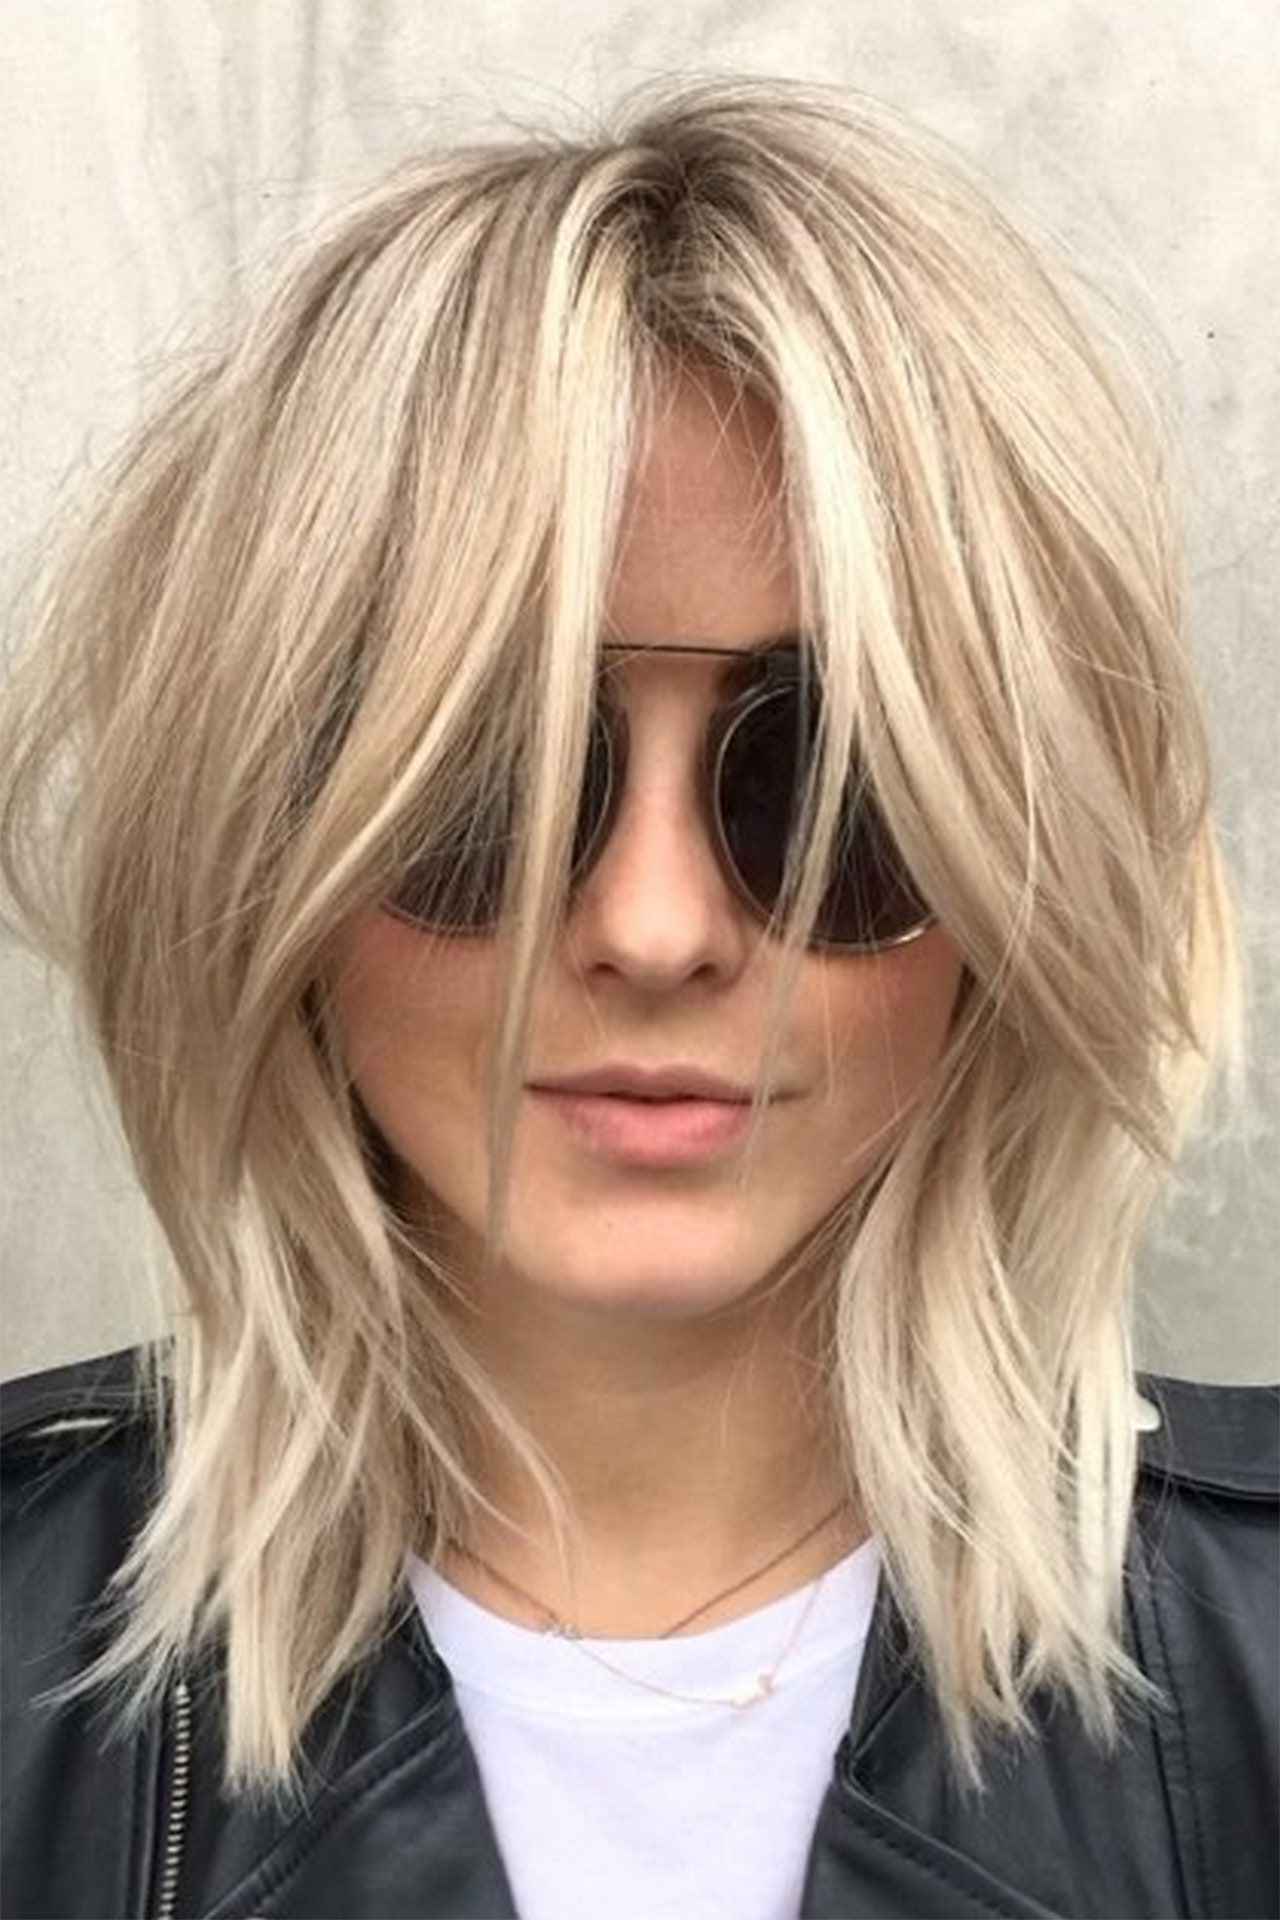 Julianne Hough Hair – Shag Cutriawna Capri | Glamour Uk For Most Up To Date Shaggy Blonde Lob Haircuts (View 25 of 25)